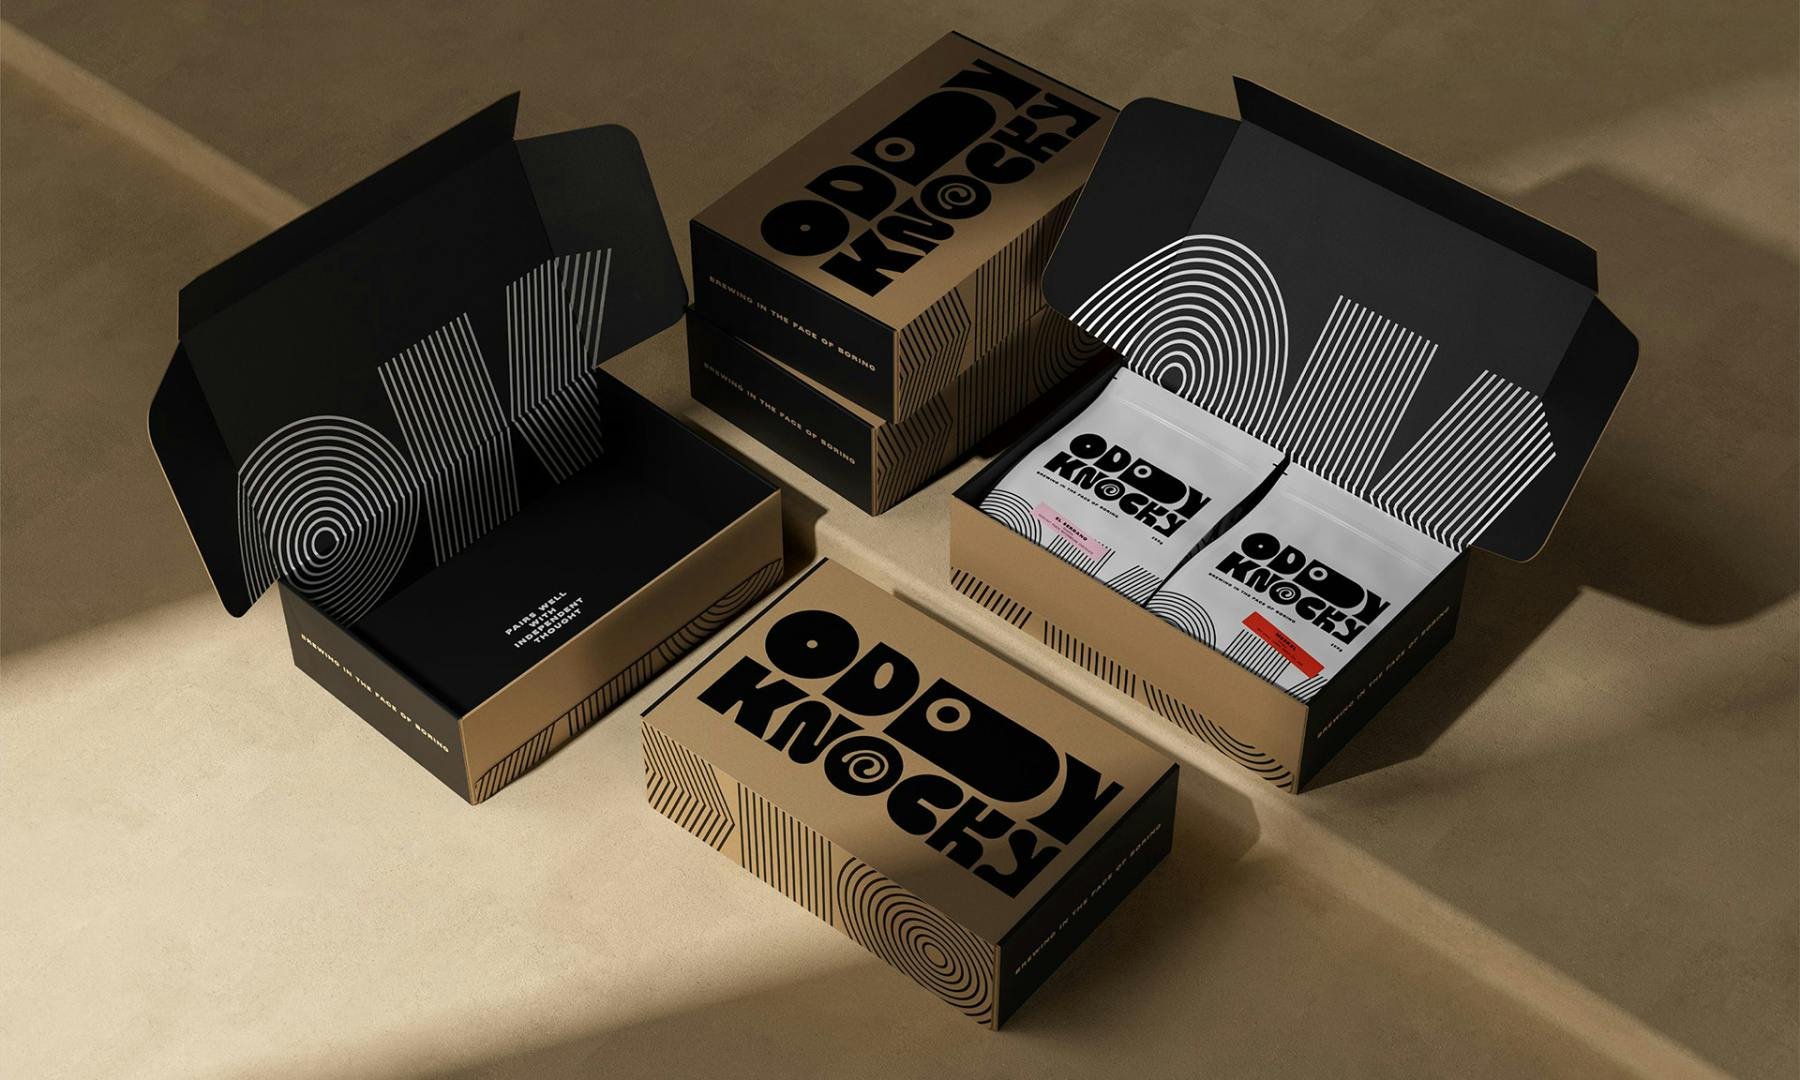 Photo showing the branding for Oddy Knocky on a range of cardboard packaging, featuring the brand's quirky elongated wordmark